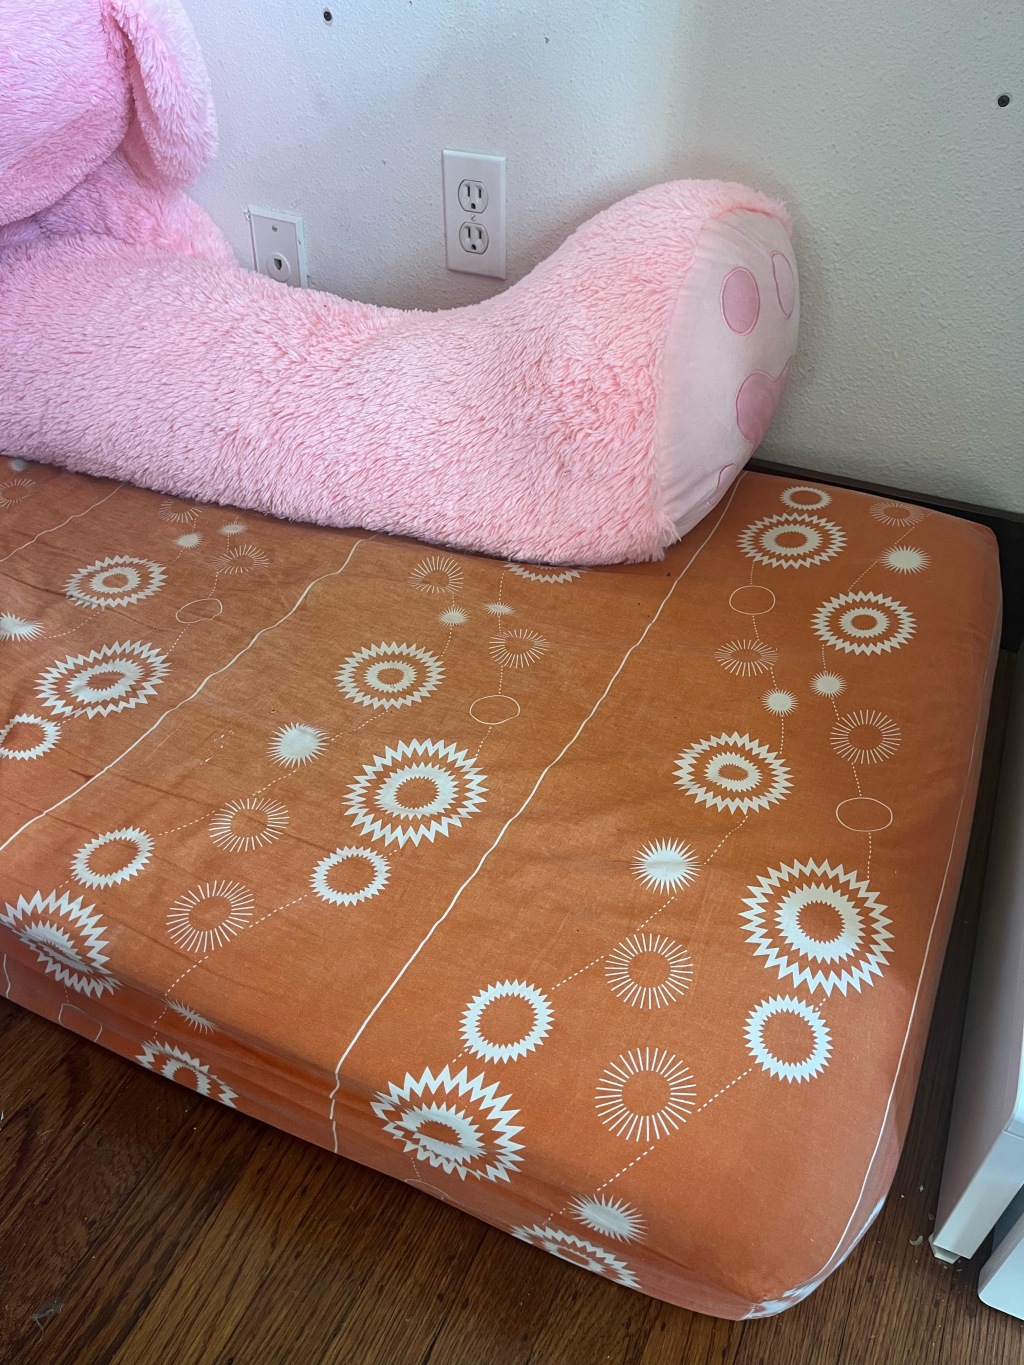 Simmons Kids SlumberTime Naturally 2 Stage Premium Plant Based Soy Foam Crib Mattress on floor in corner of room with orange pattern sheet and giant pink teddy bear